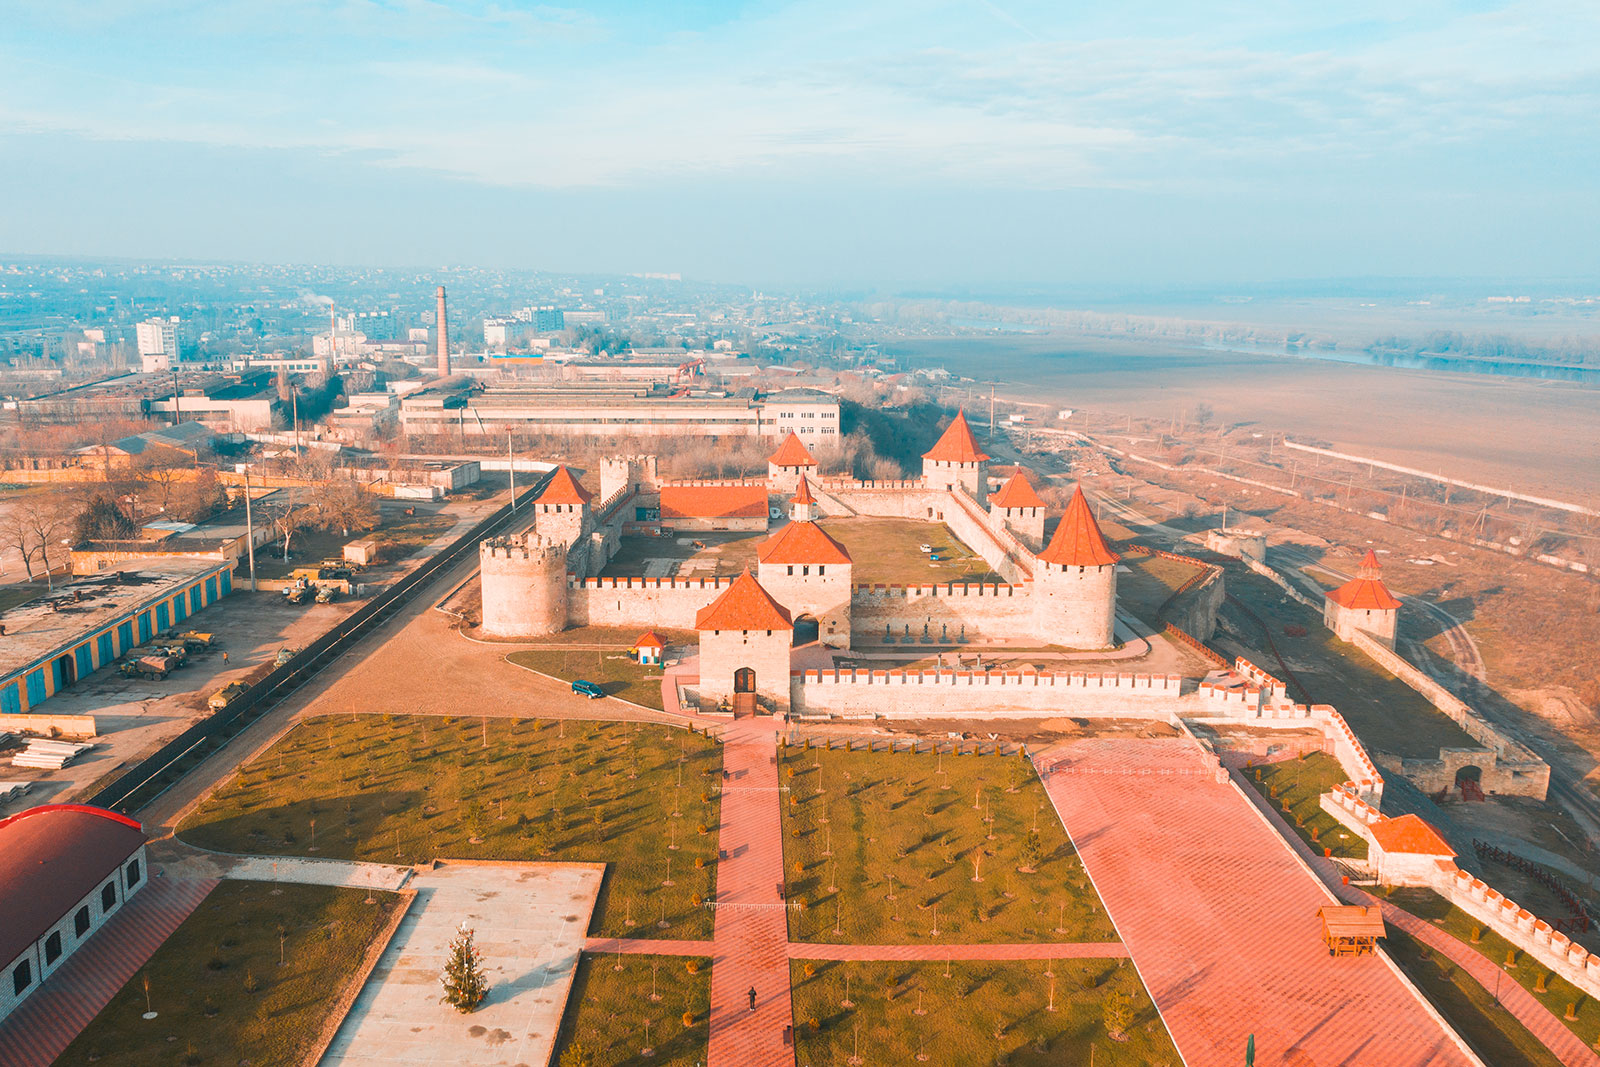 Aerial view of Bendery Fortress in Transnistria. 2020 reflection